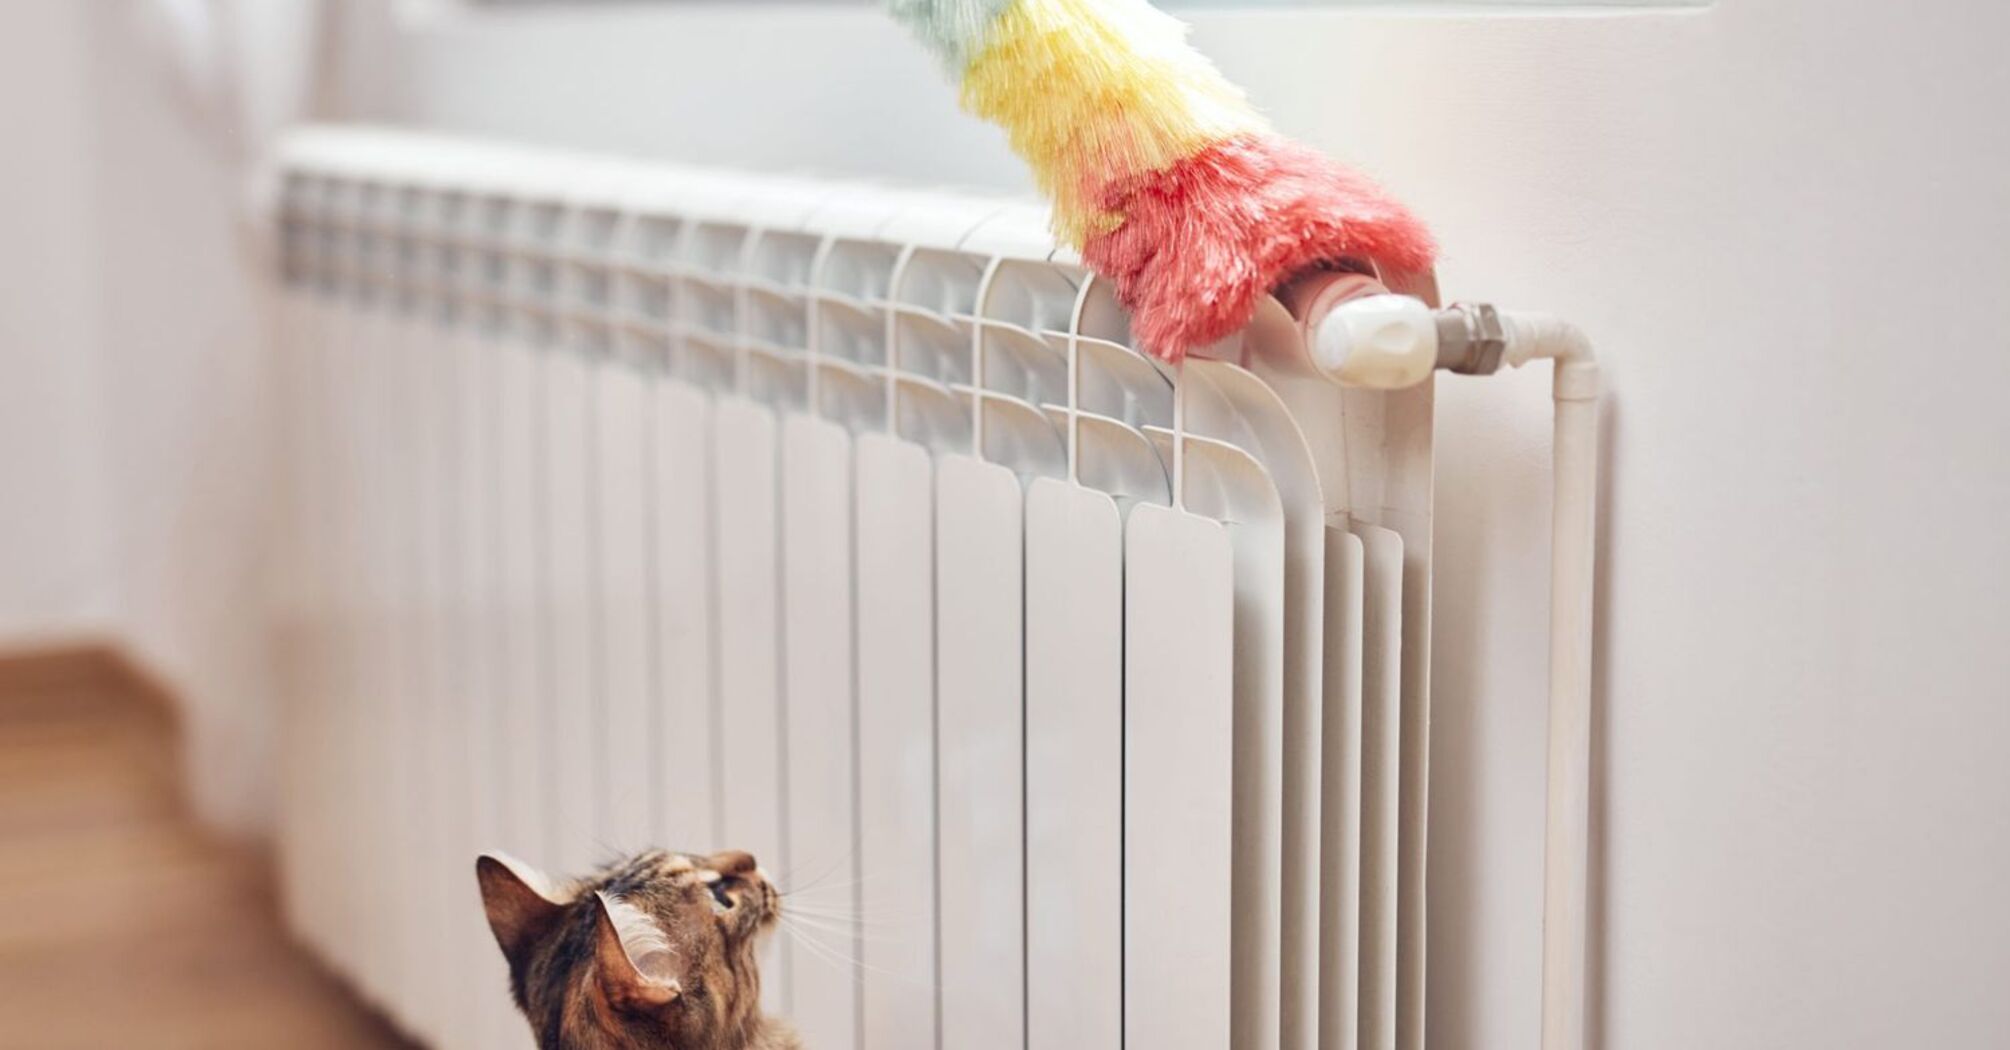 How to easily clean a heating radiator